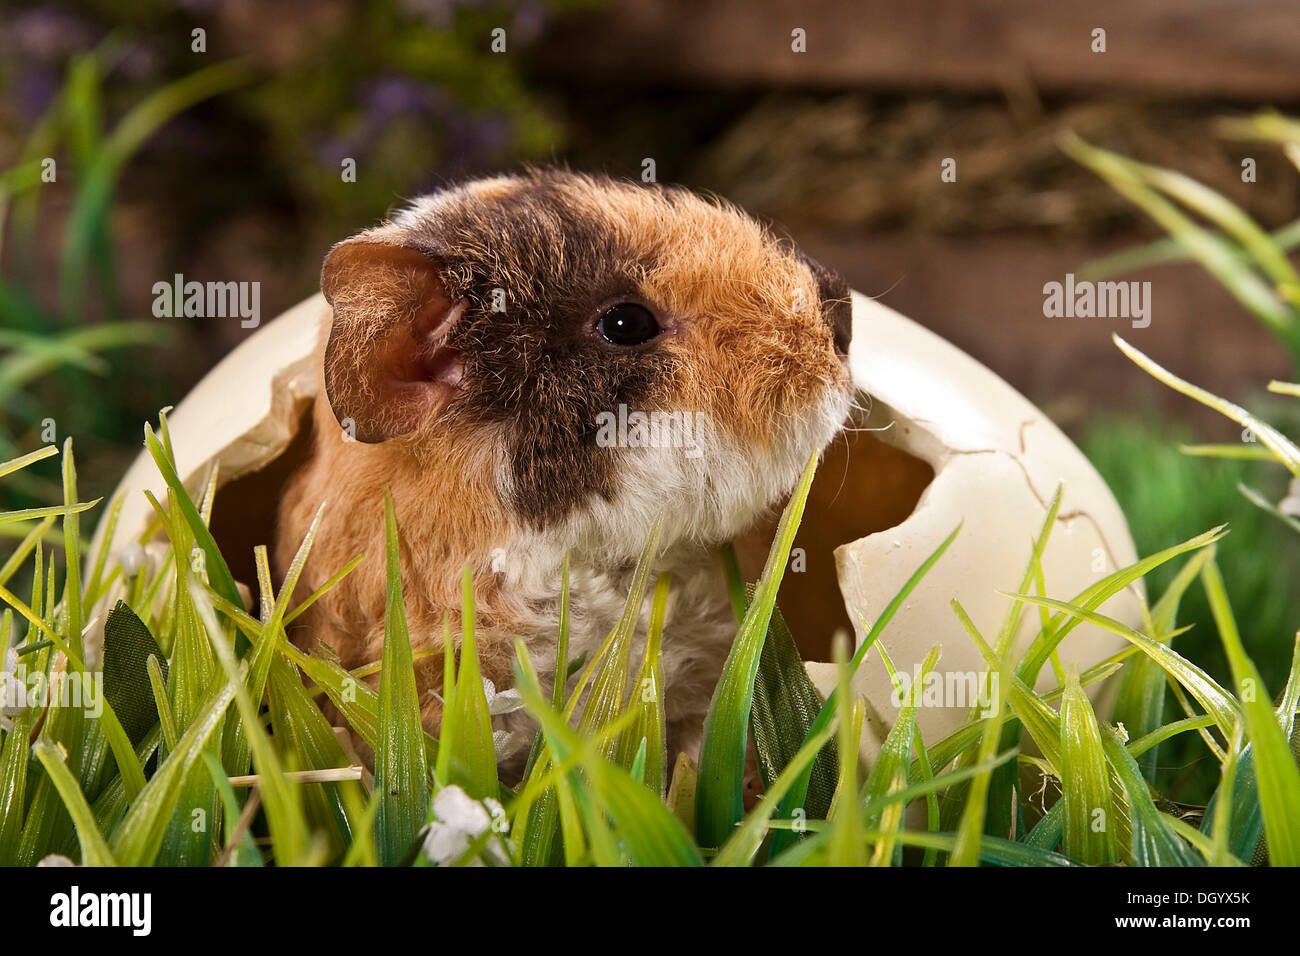 US Teddy guinea pig, young in an egg shell Stock Photo